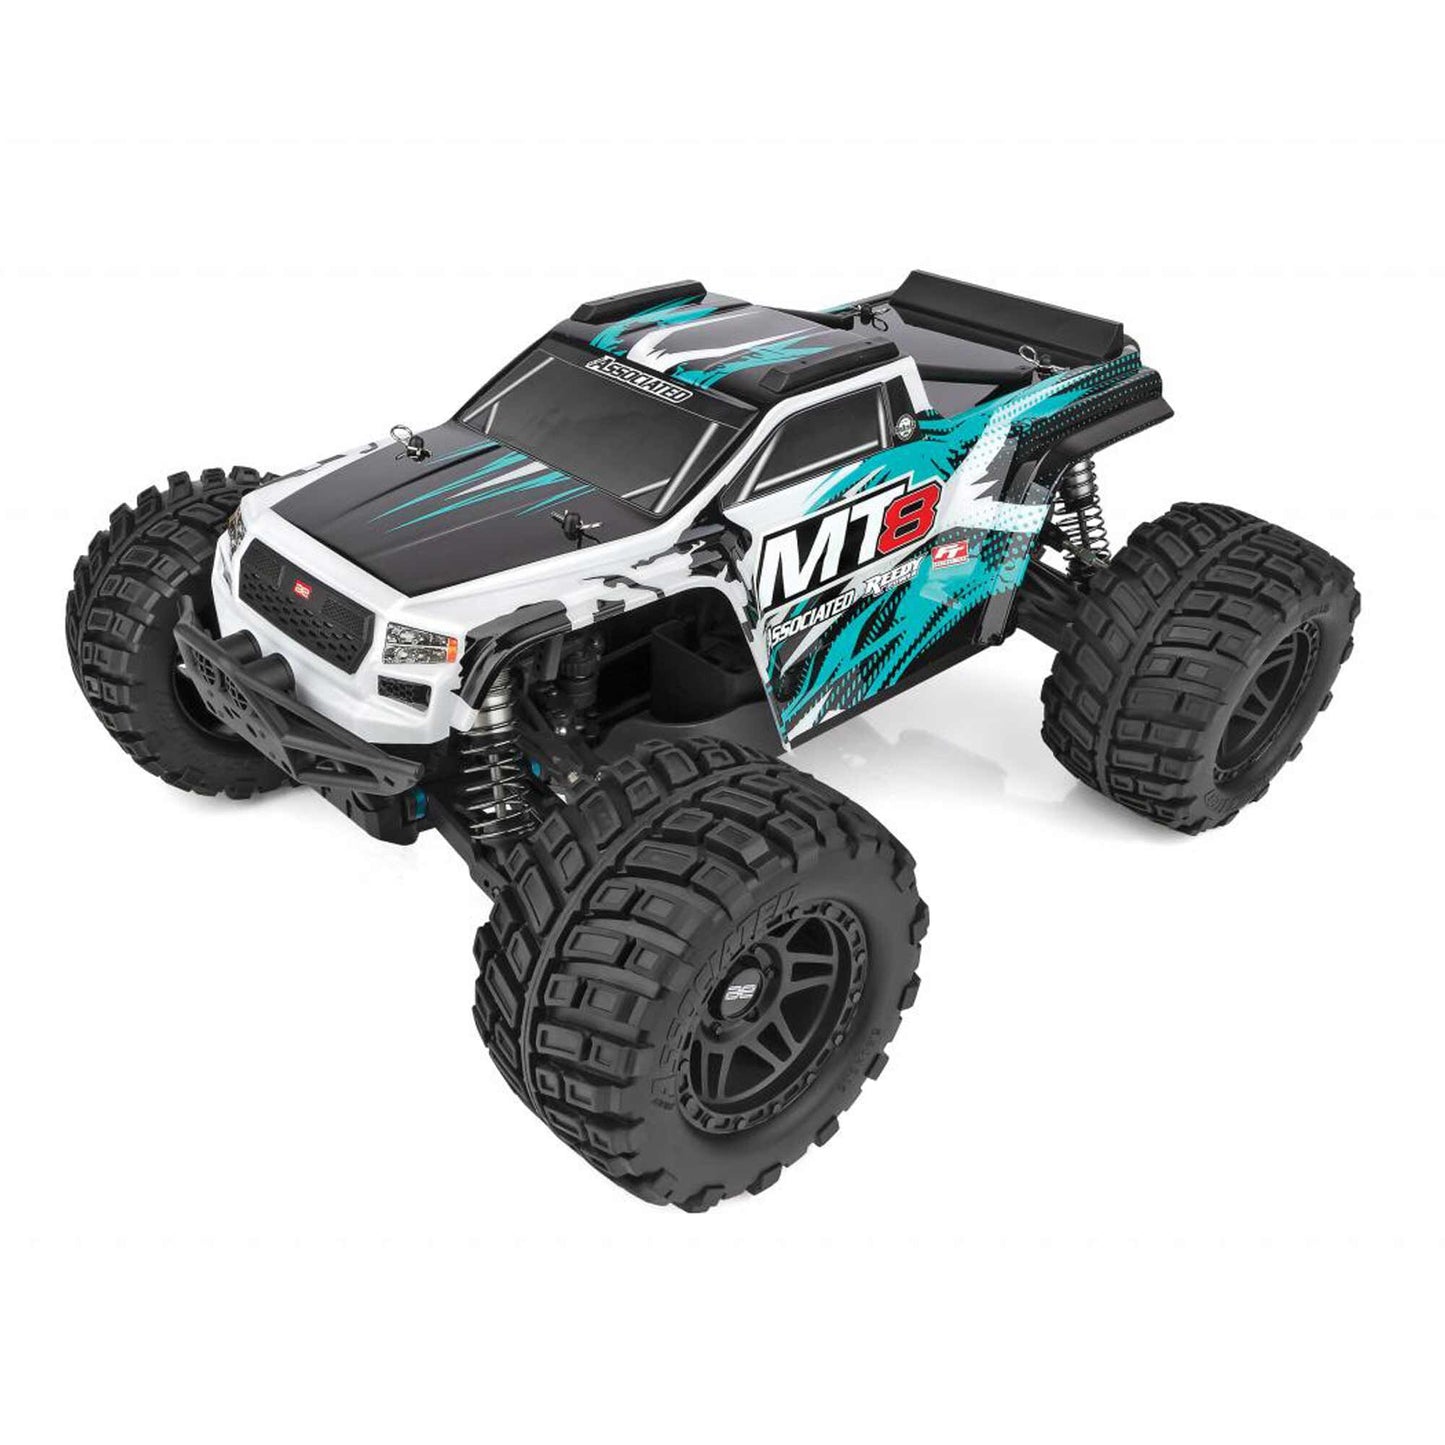 1/8 Rival MT8 4X4 Monster Truck RTR  Teal